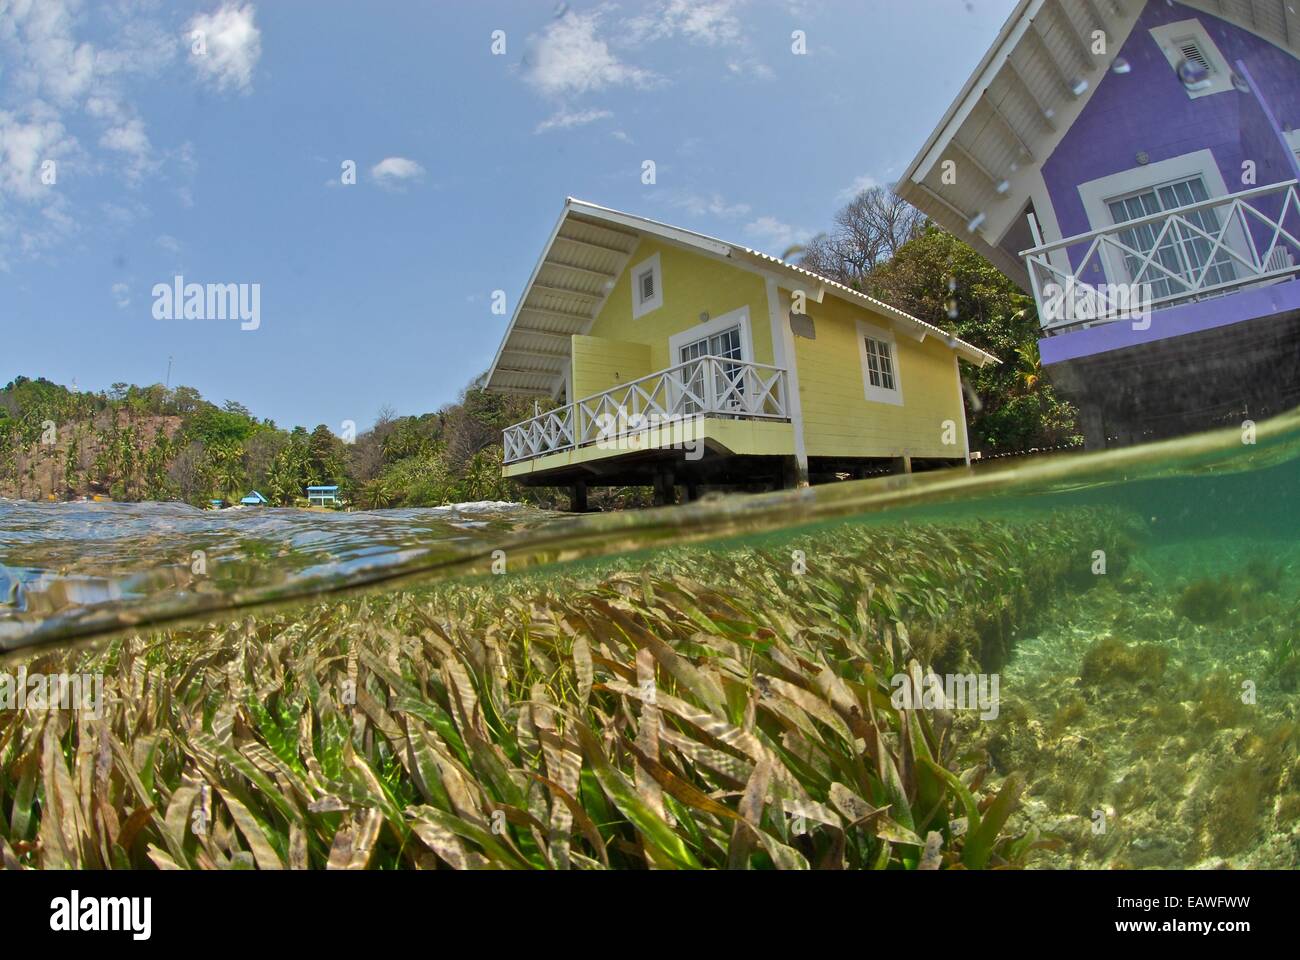 Vacation villas overlook the shallow waters of the Caribbean. Stock Photo